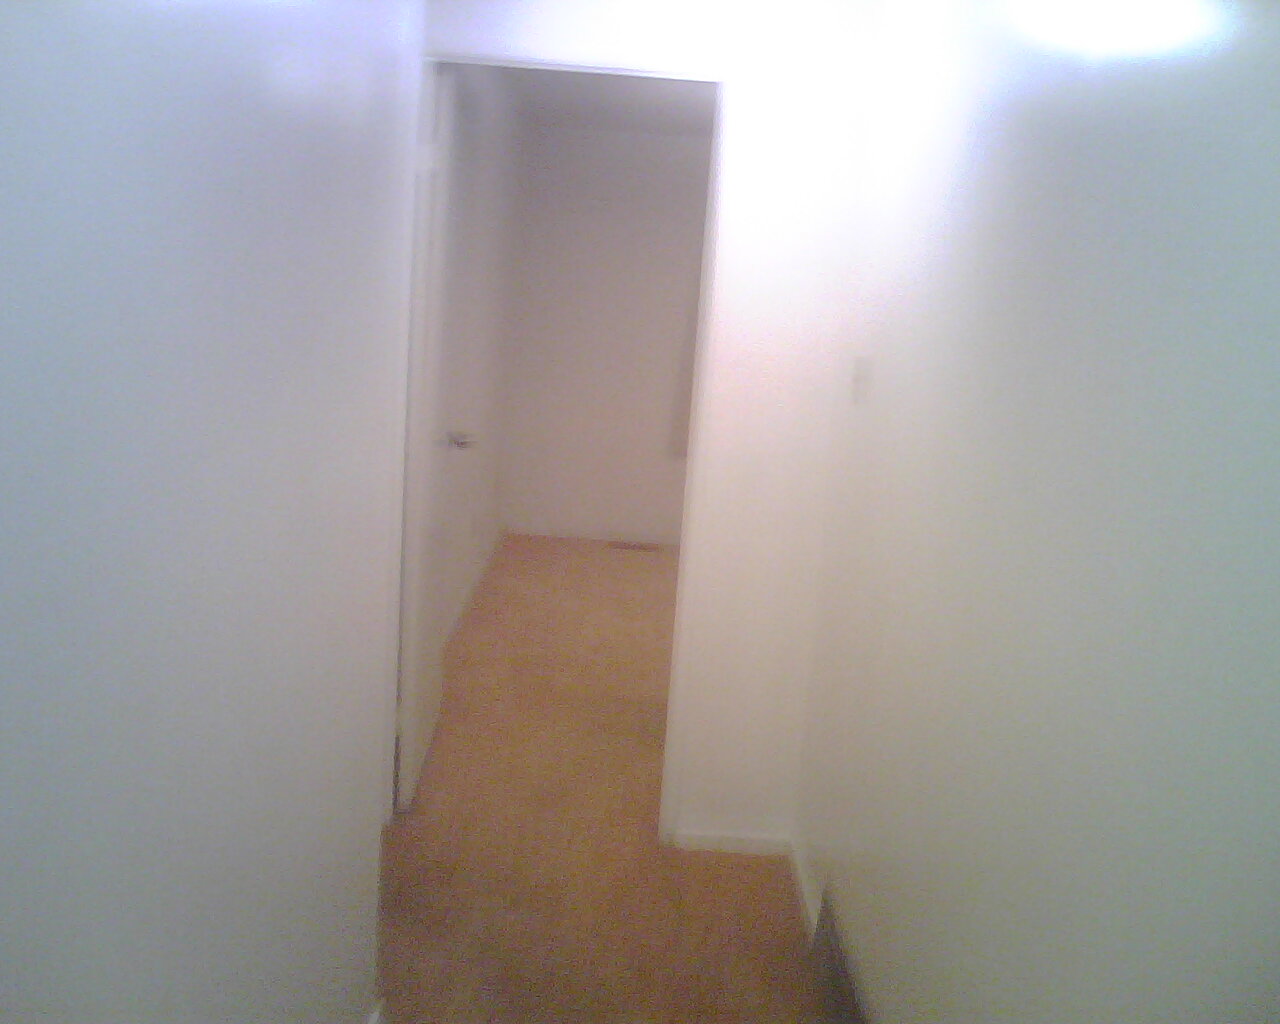 Hallway on the second floor as seen from the front of the stairs (btw there is a small closet behind me)